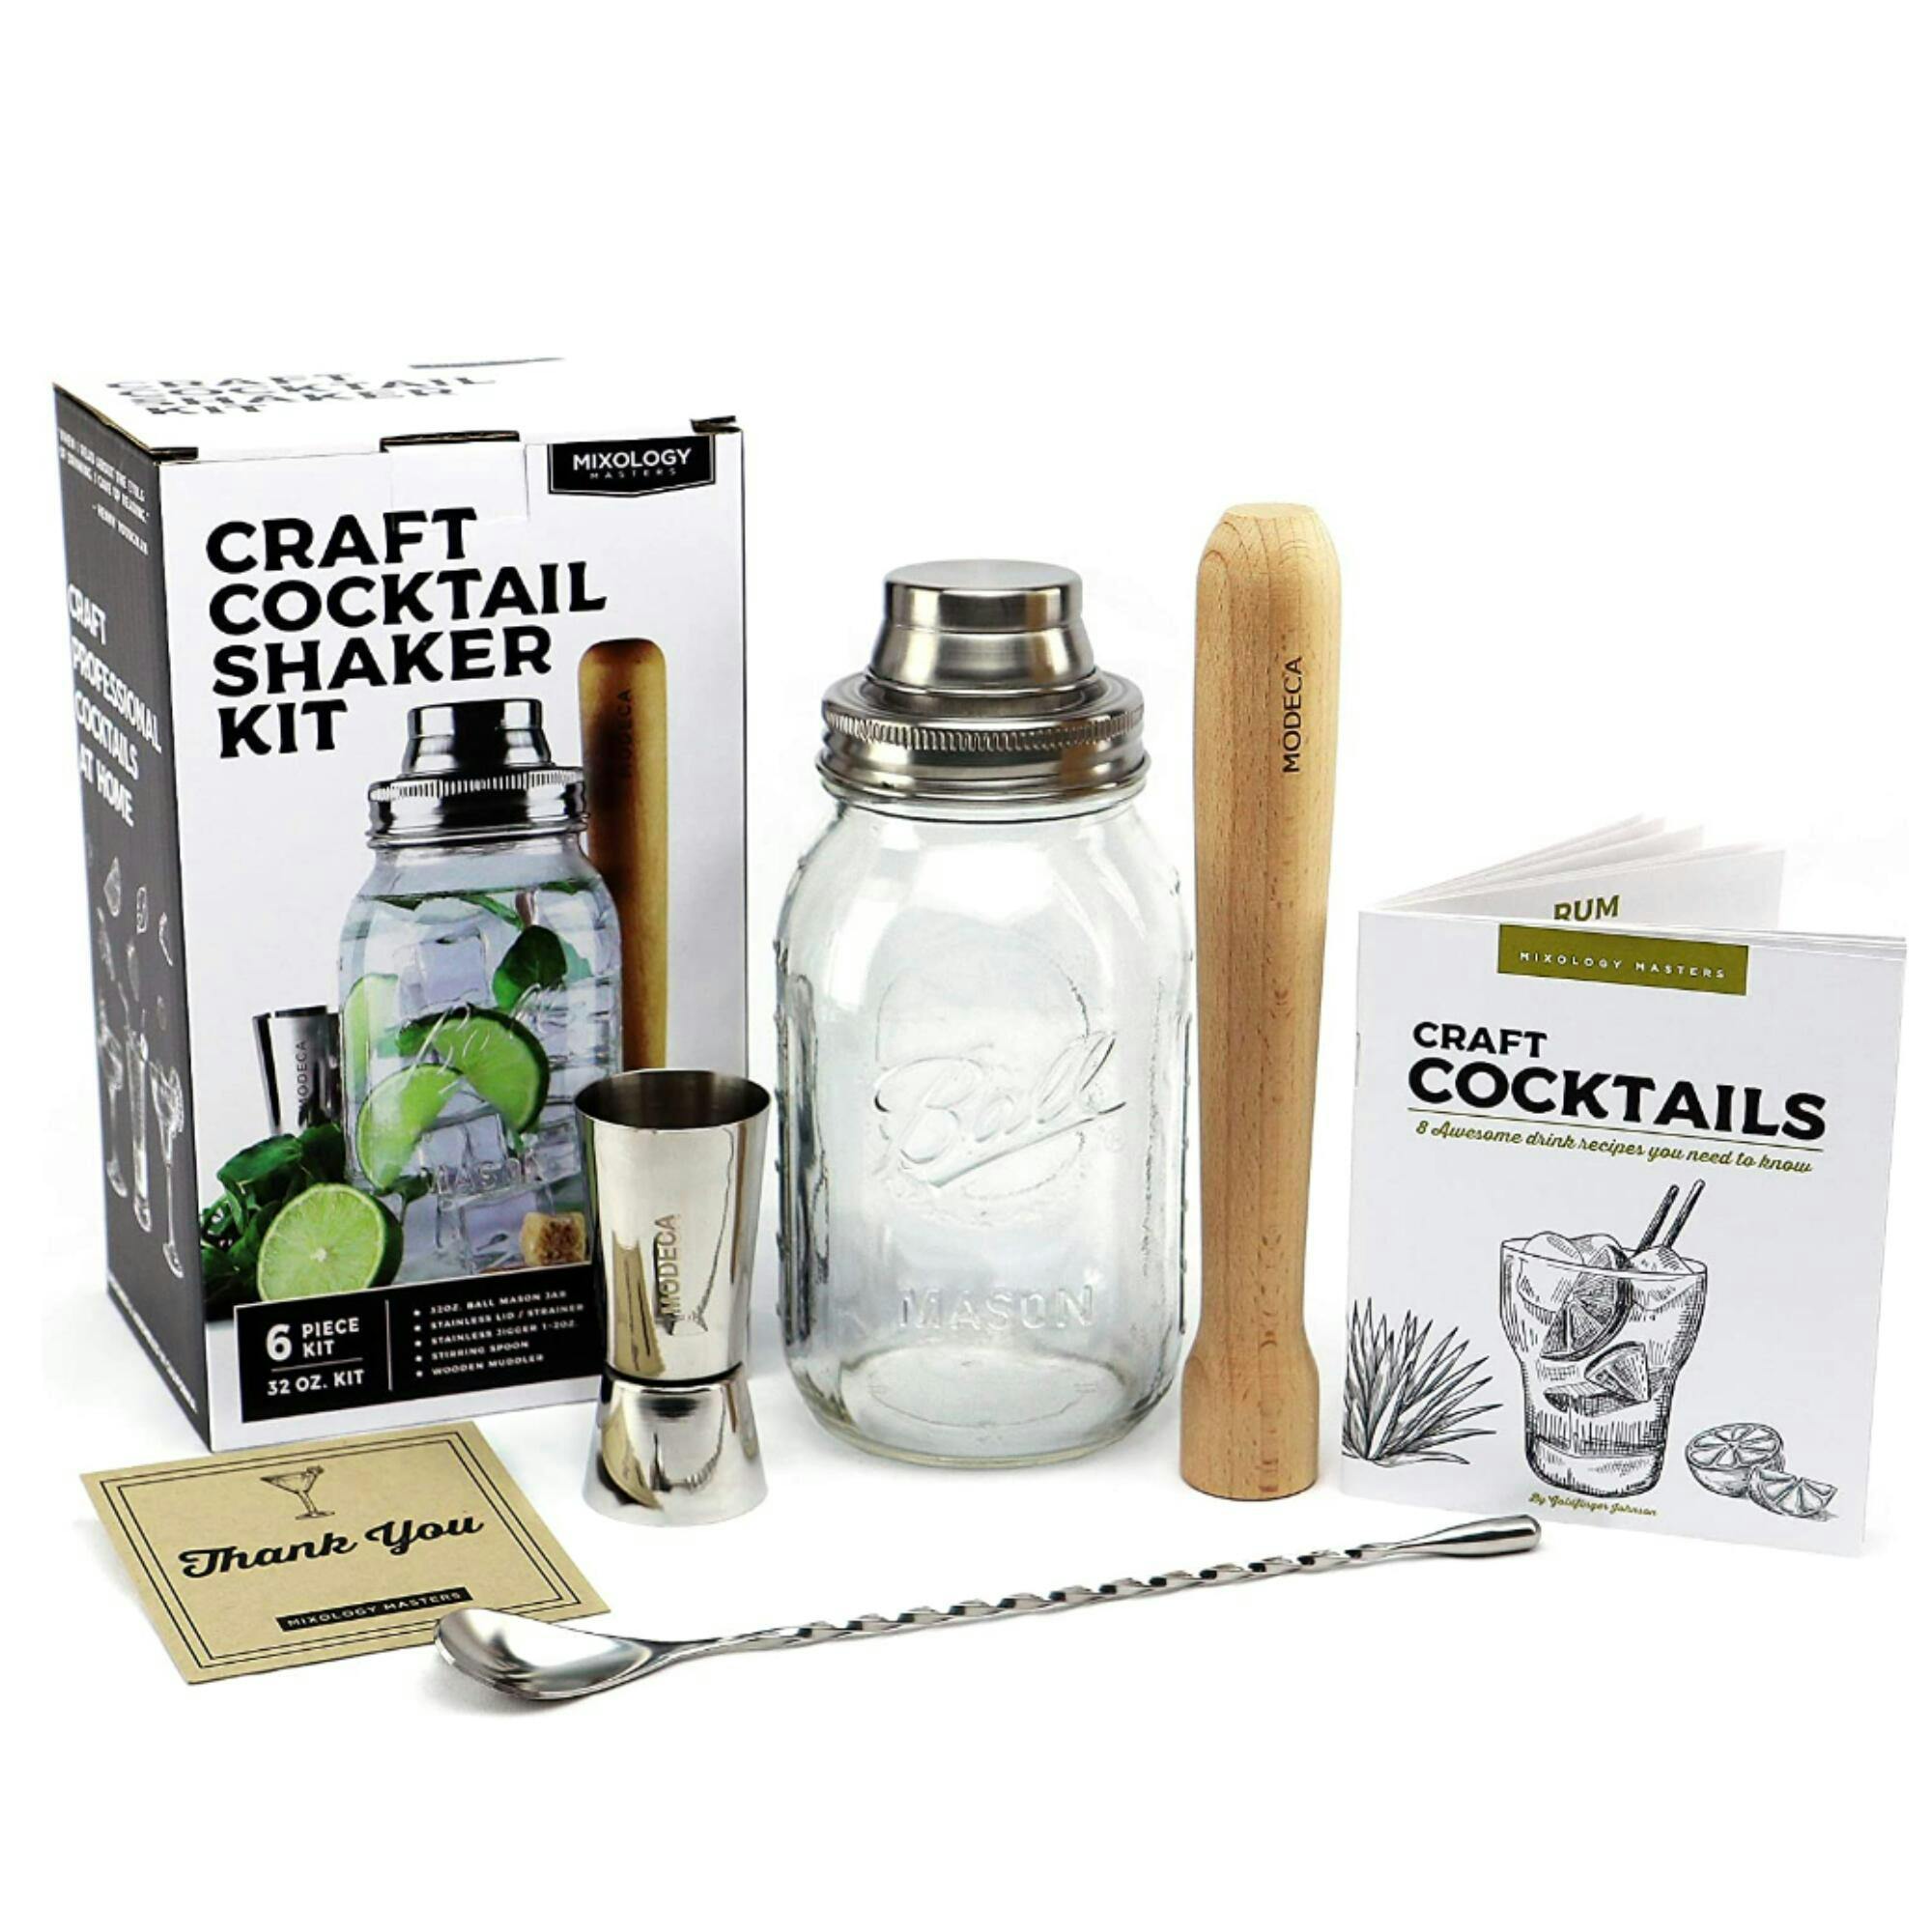 A glass mason jar, wooden muddler, stainless steel shot glass, stirer, and cocktail recipe book are staged on a white background.